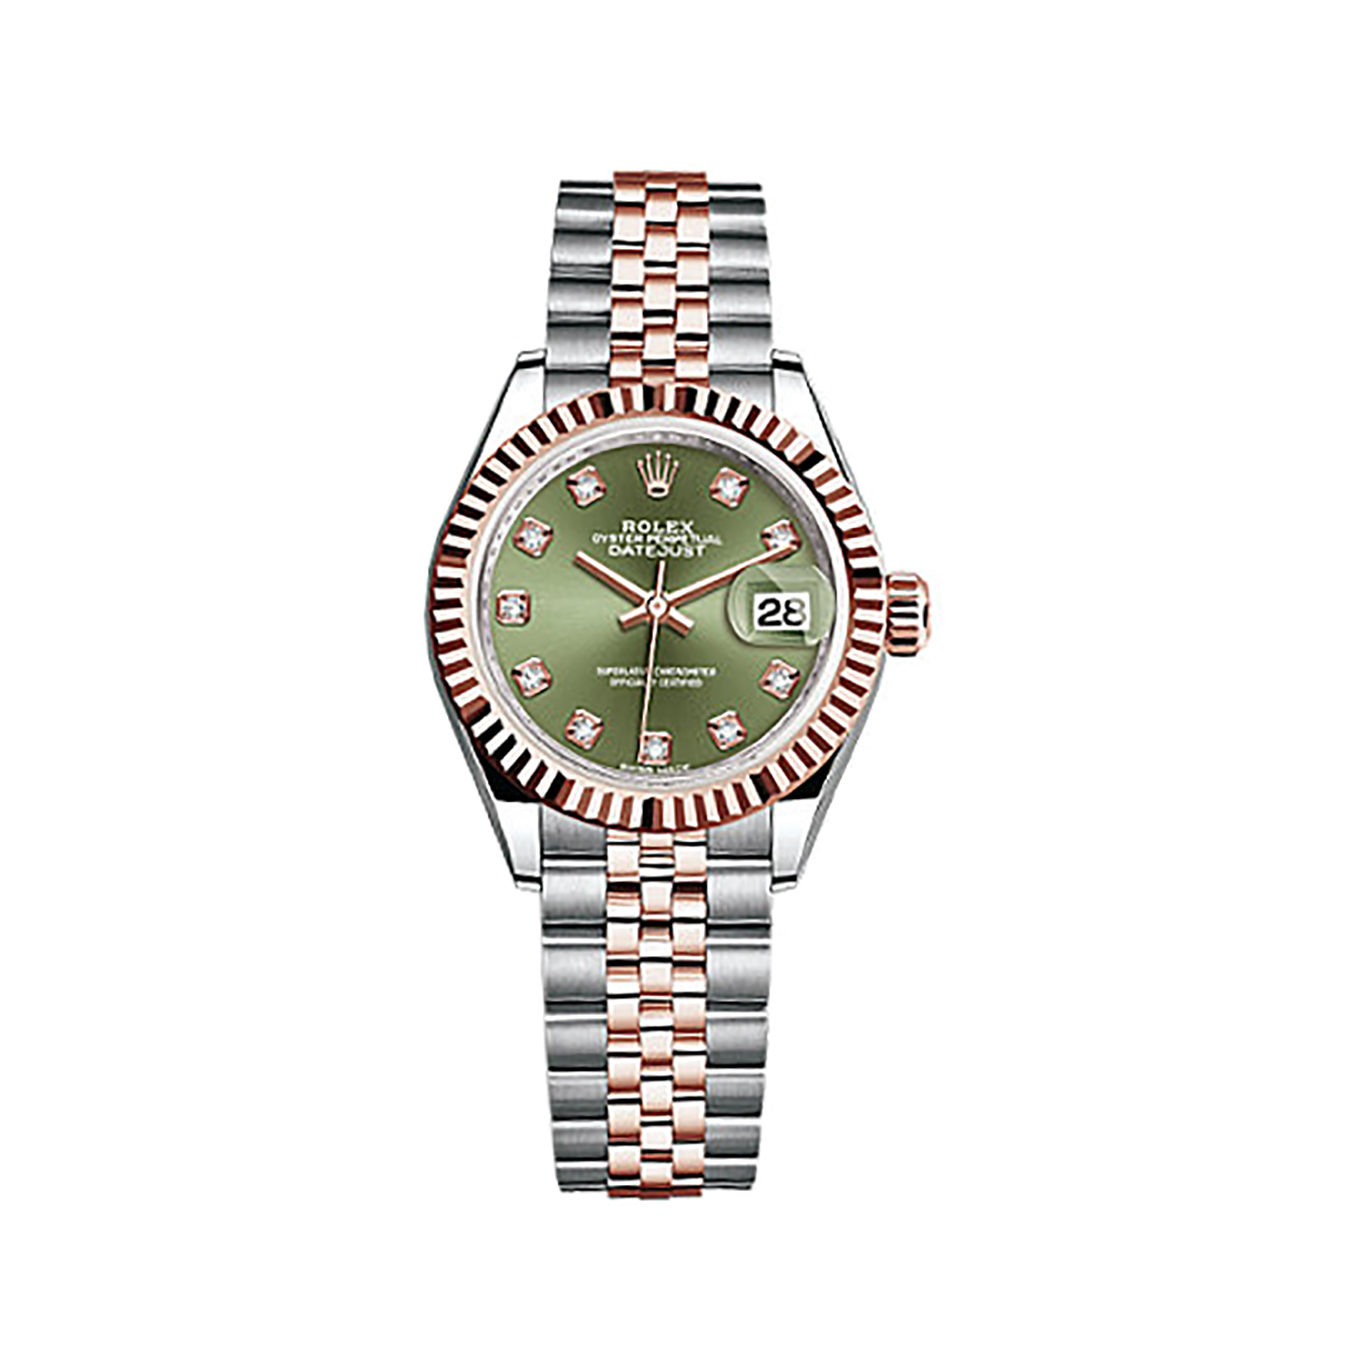 Lady-Datejust 28 279171 Rose Gold & Stainless Steel Watch (Olive Green Set with Diamonds)